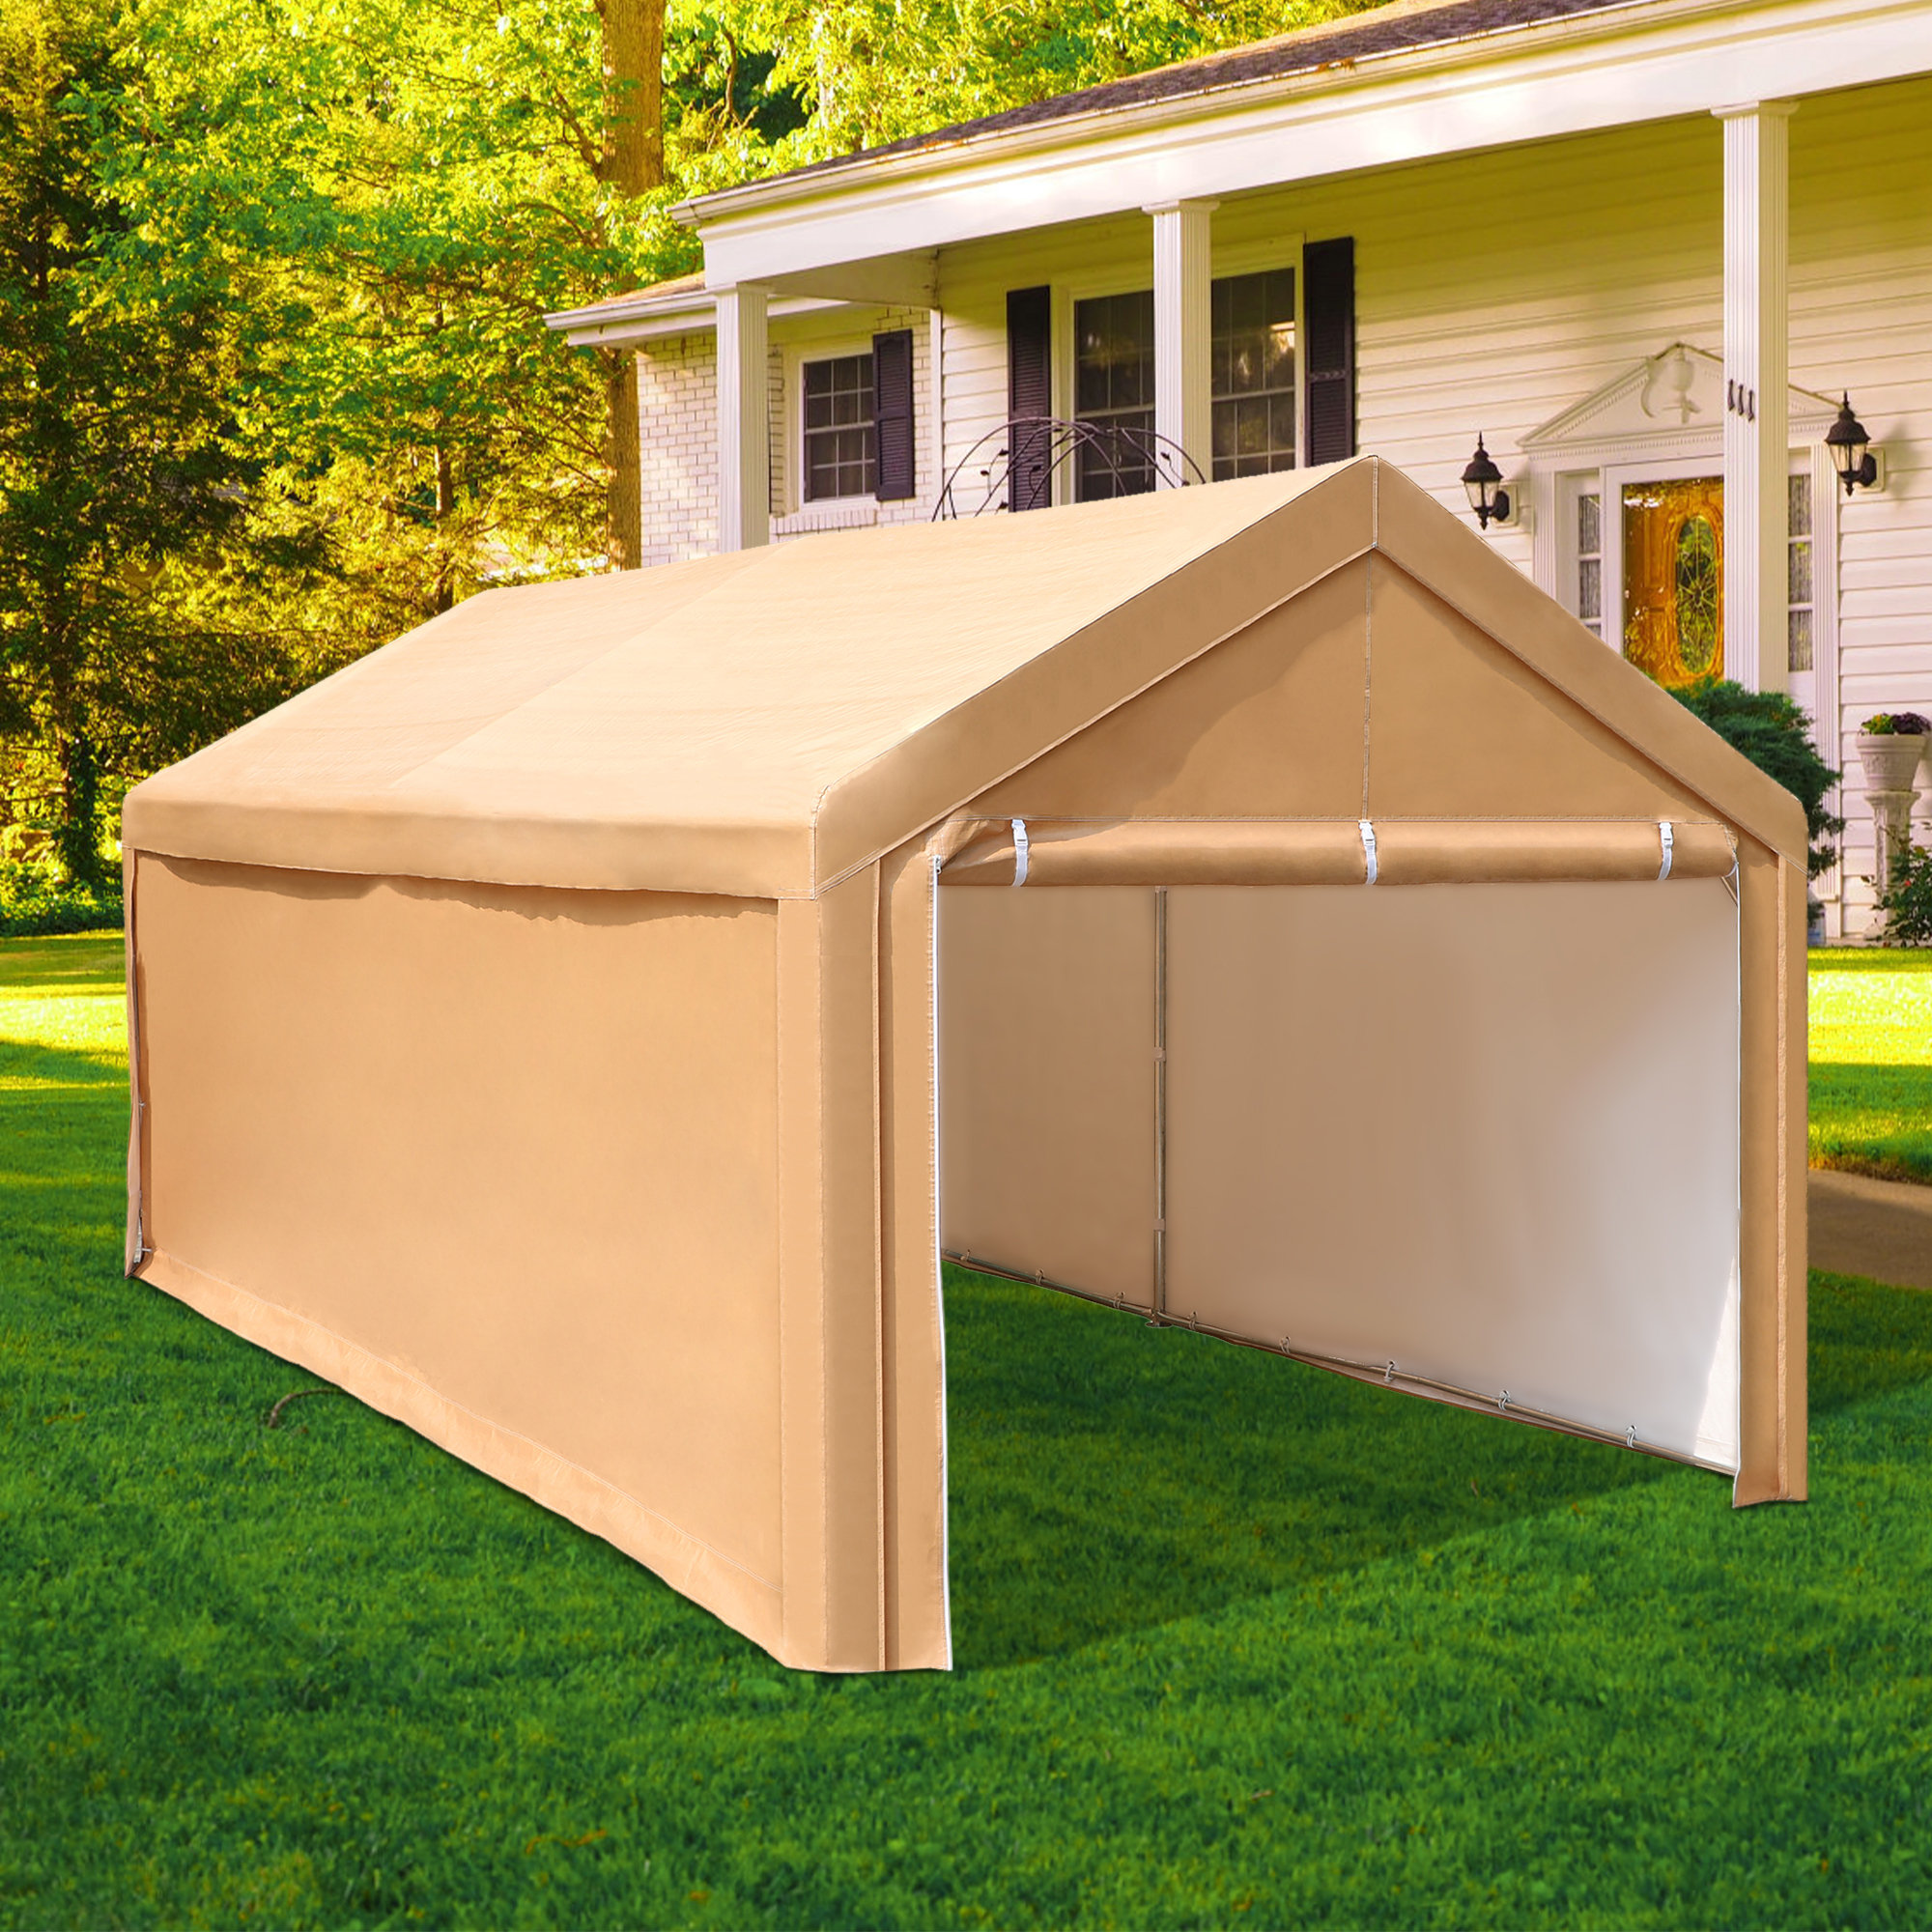 Mobile garage carport parking shed home canopy tent outdoor